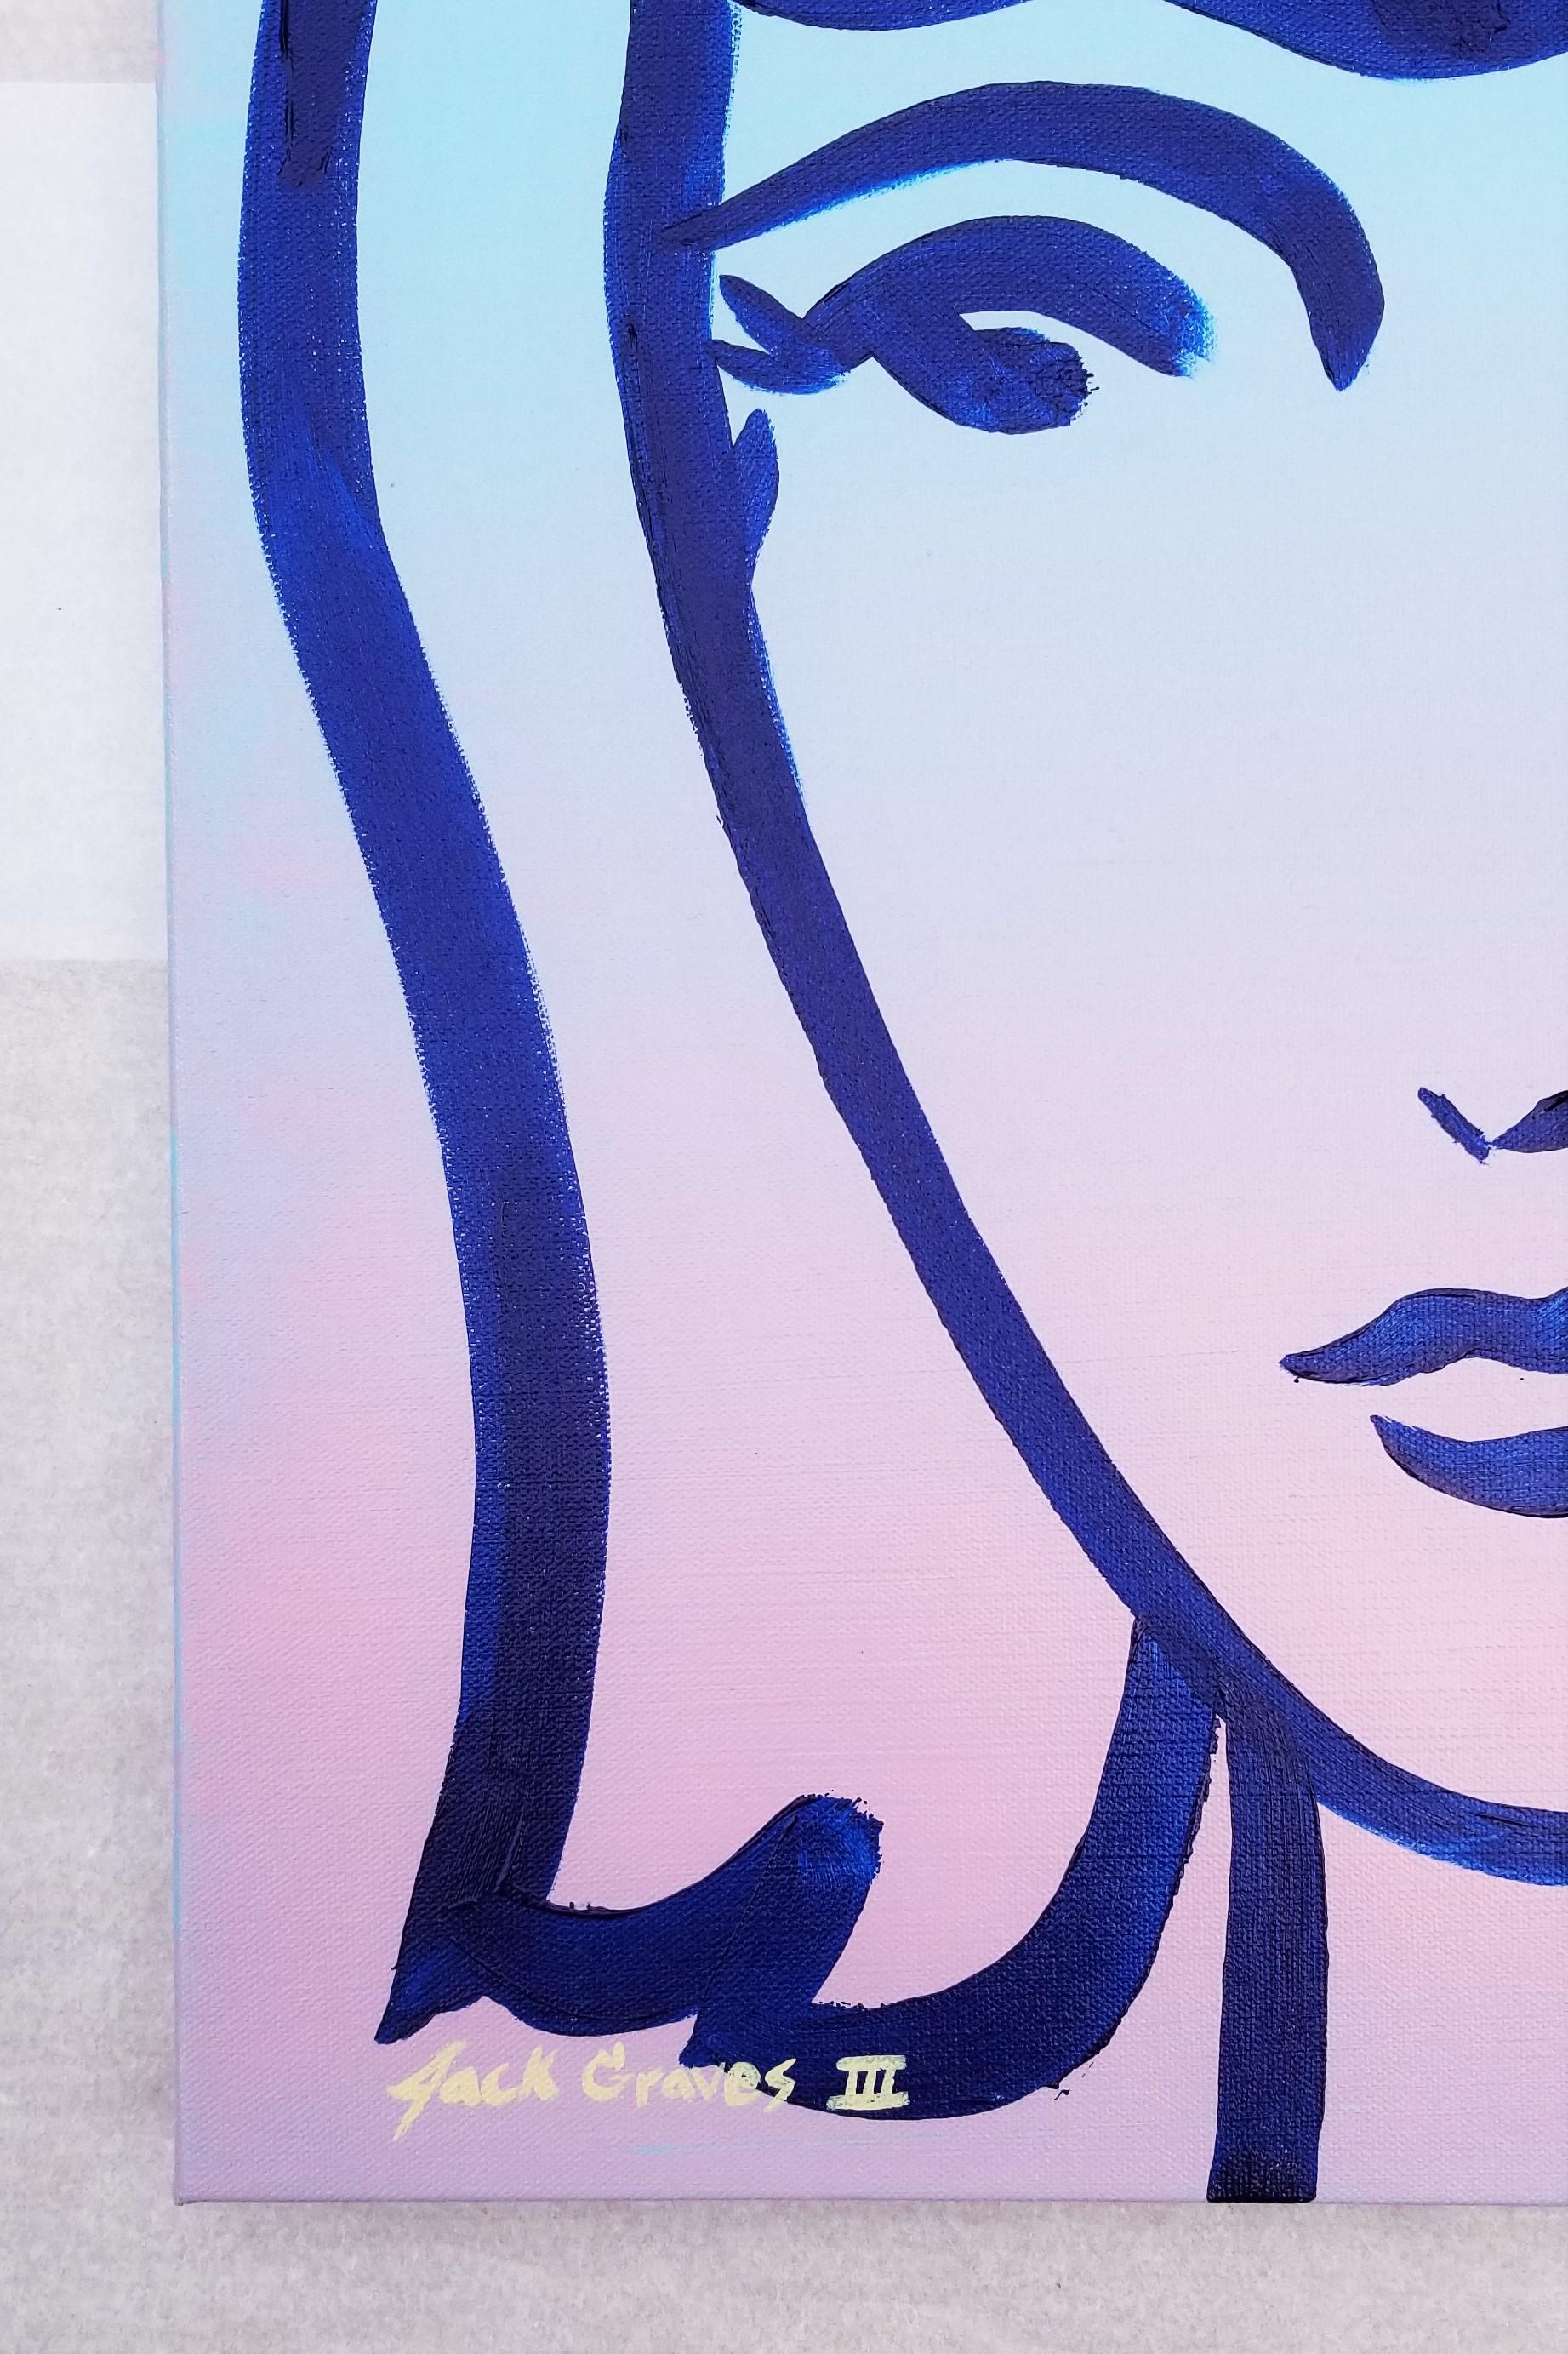 Female Face Icon XII /// Contemporary Pop Street Art Portrait Matisse Picasso - Painting by Jack Graves III